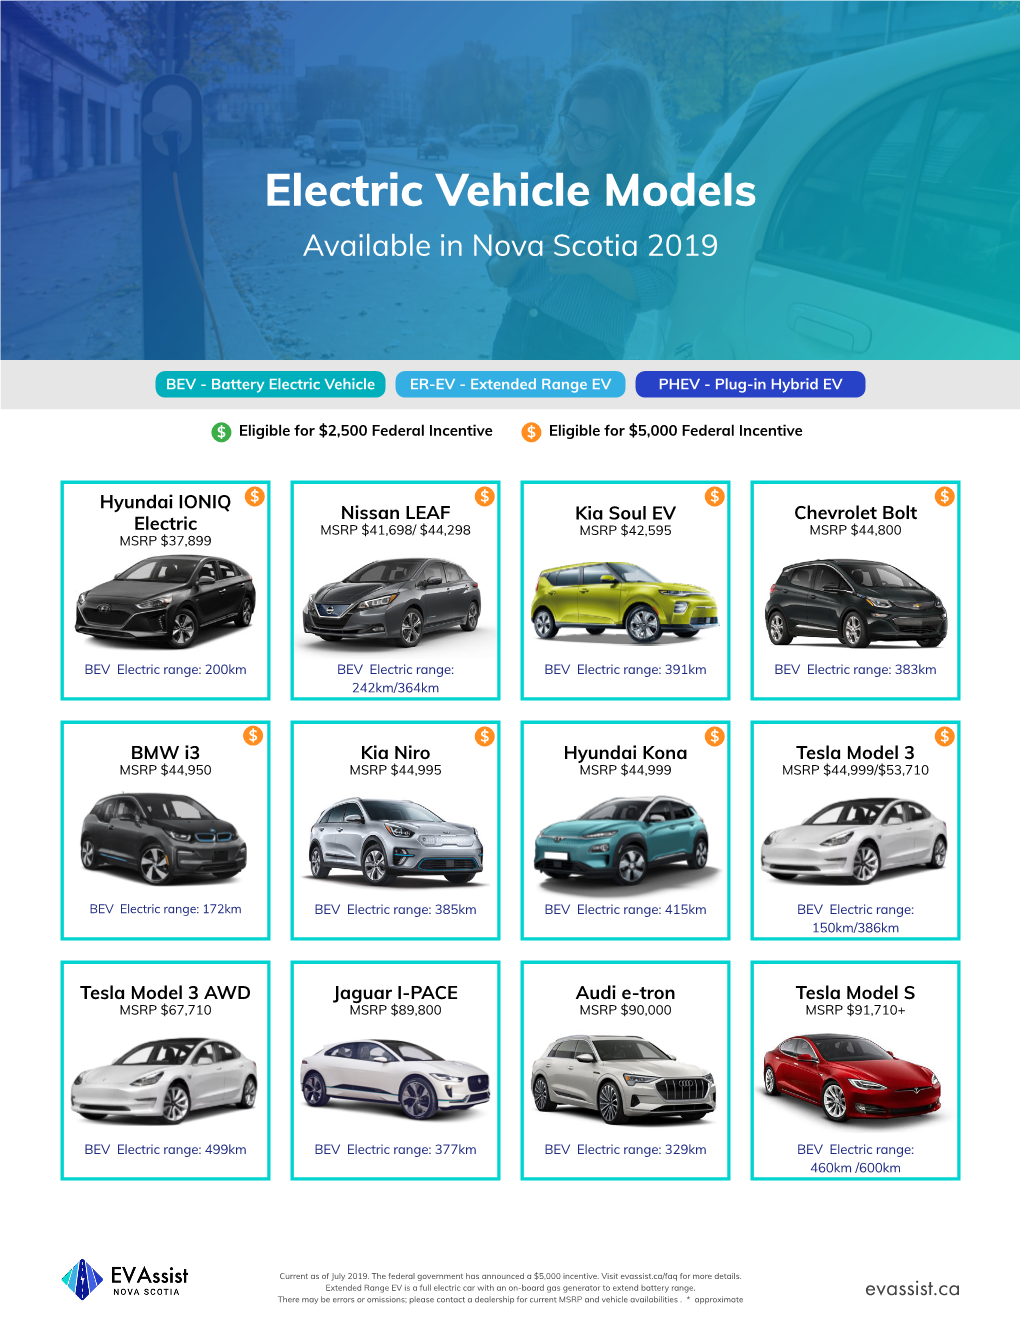 Electric Vehicle Models Available in Nova Scotia 2019